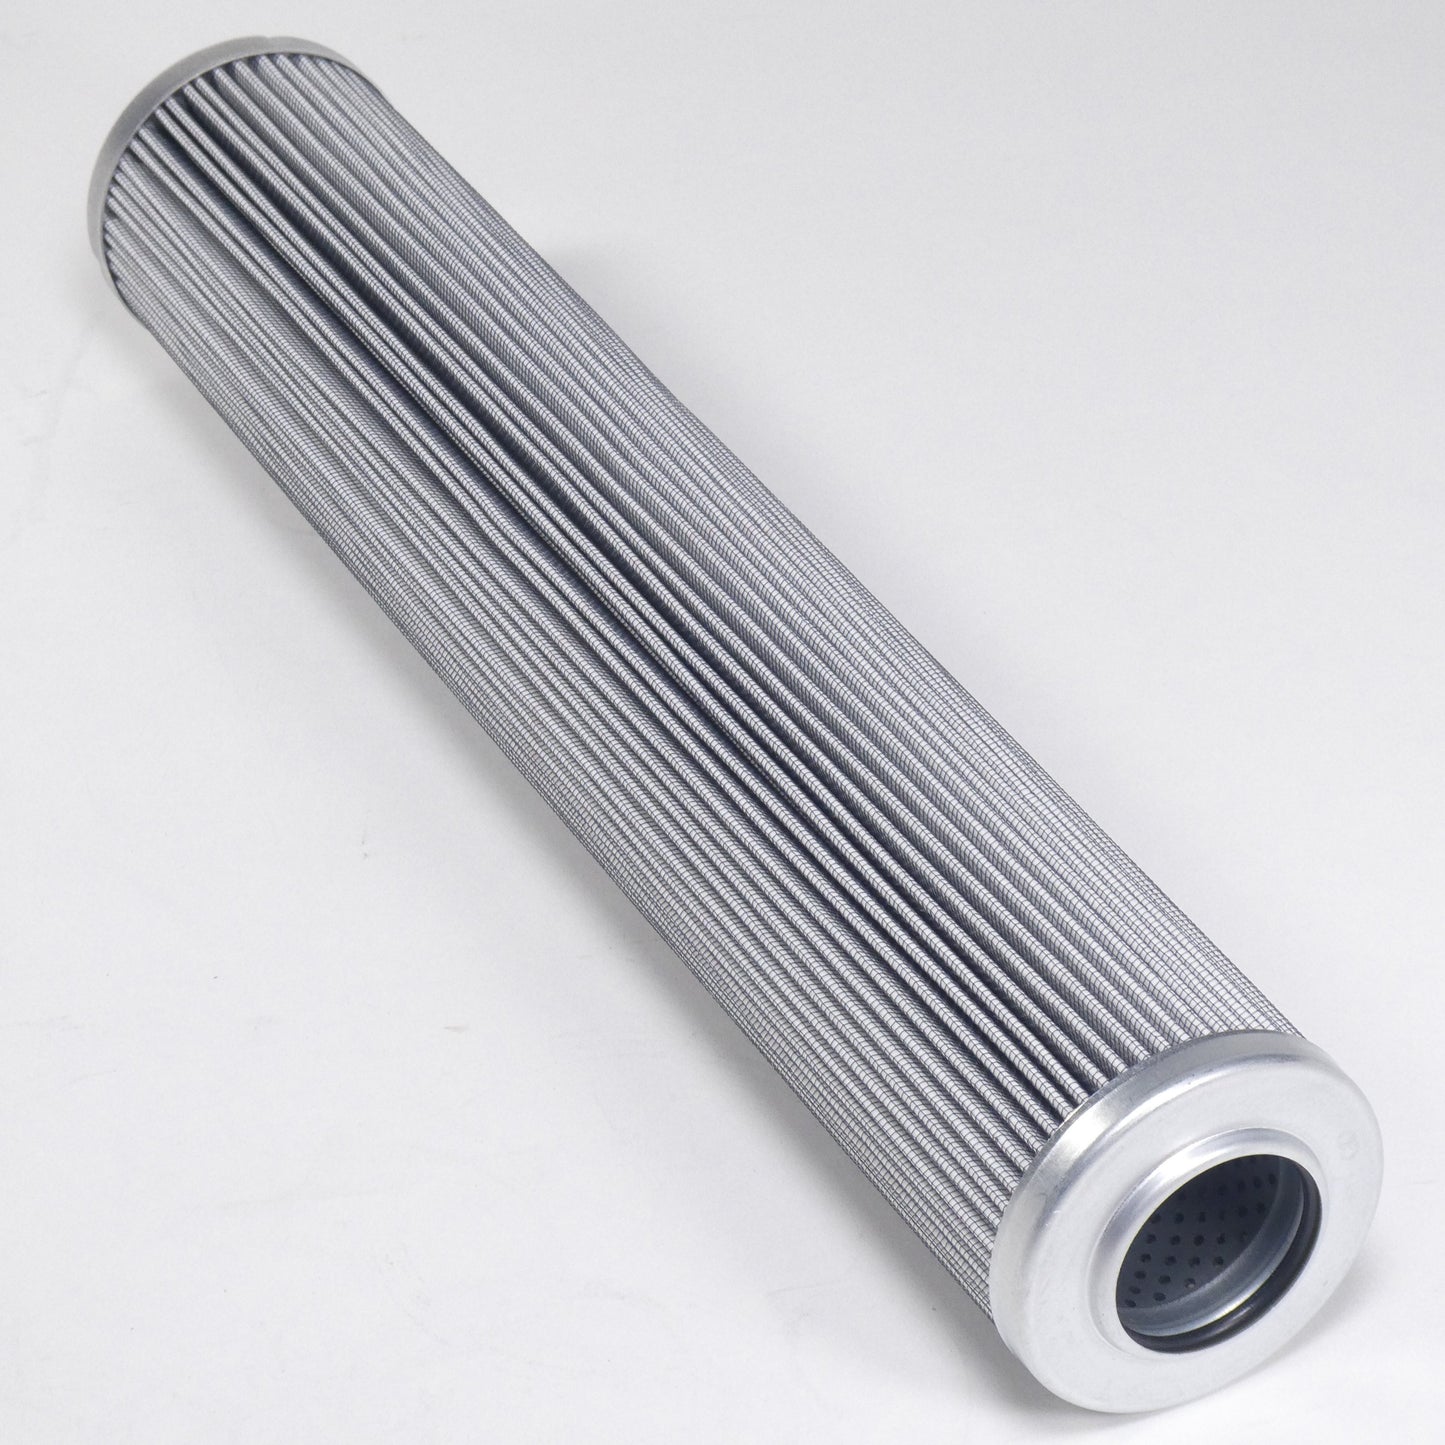 Hydrafil Replacement Filter Element for Mahle P9600D16N25FPM